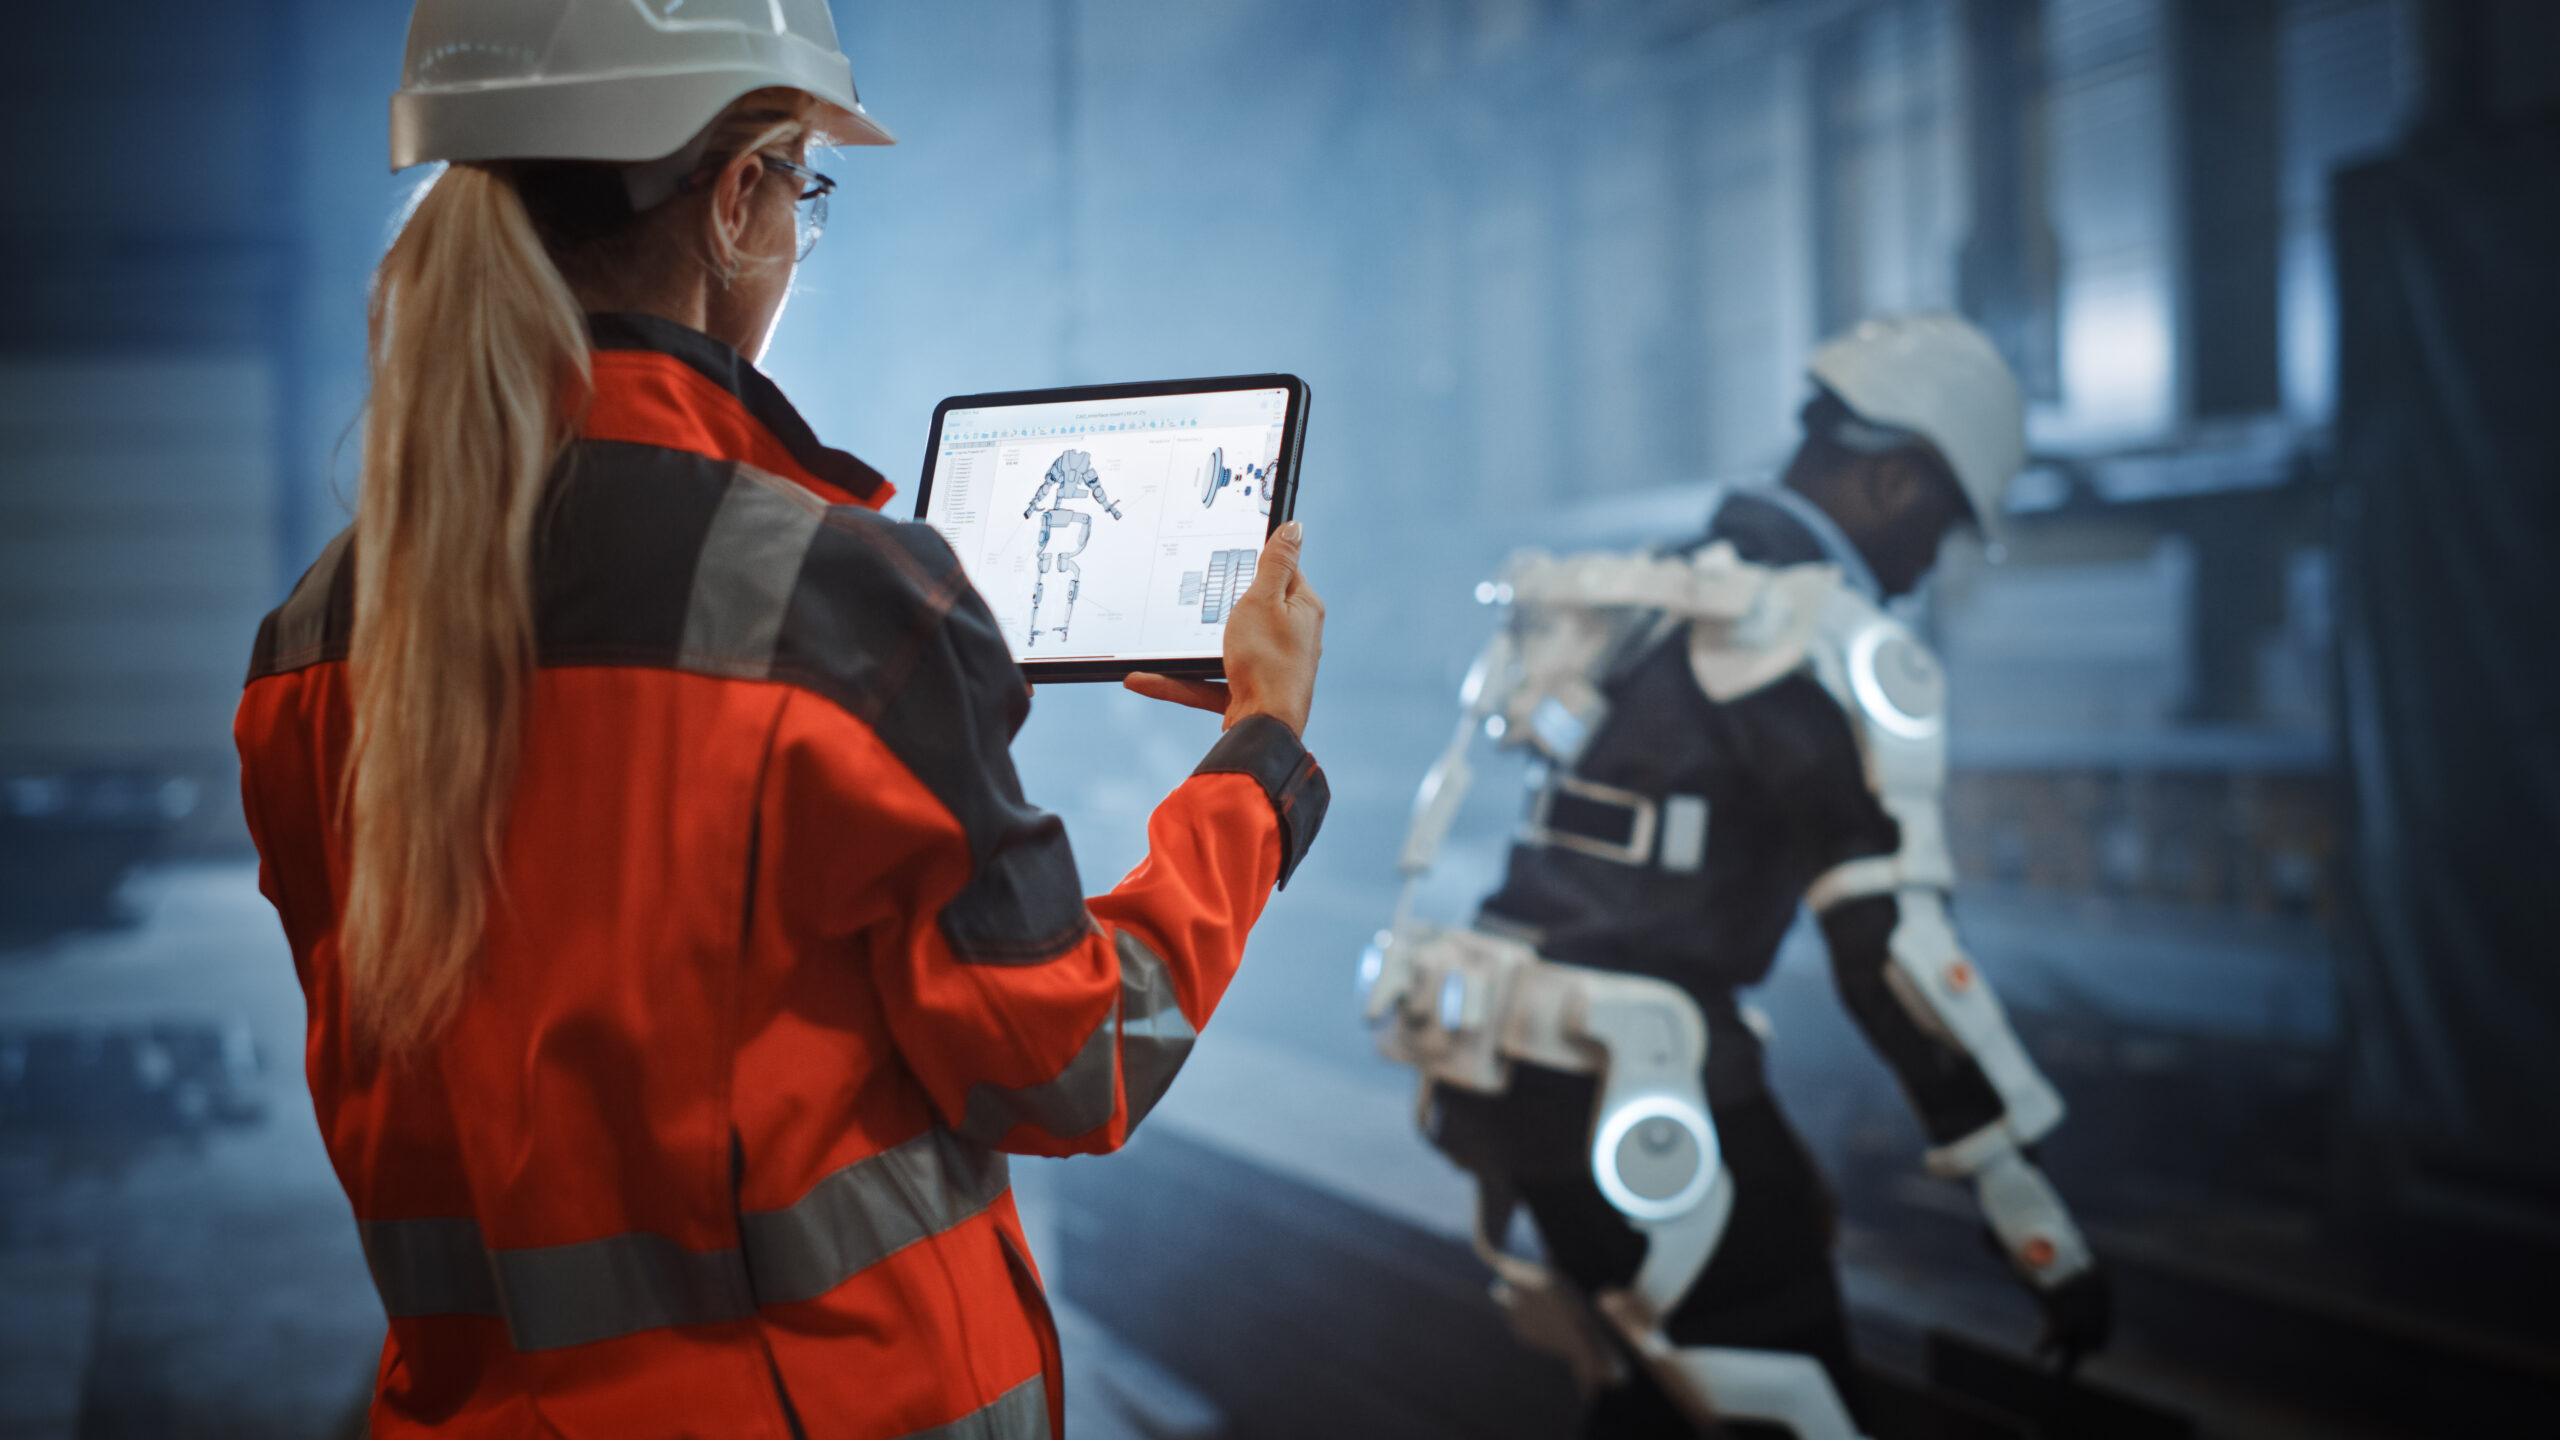 How Technology Can Boost Workplace Safety